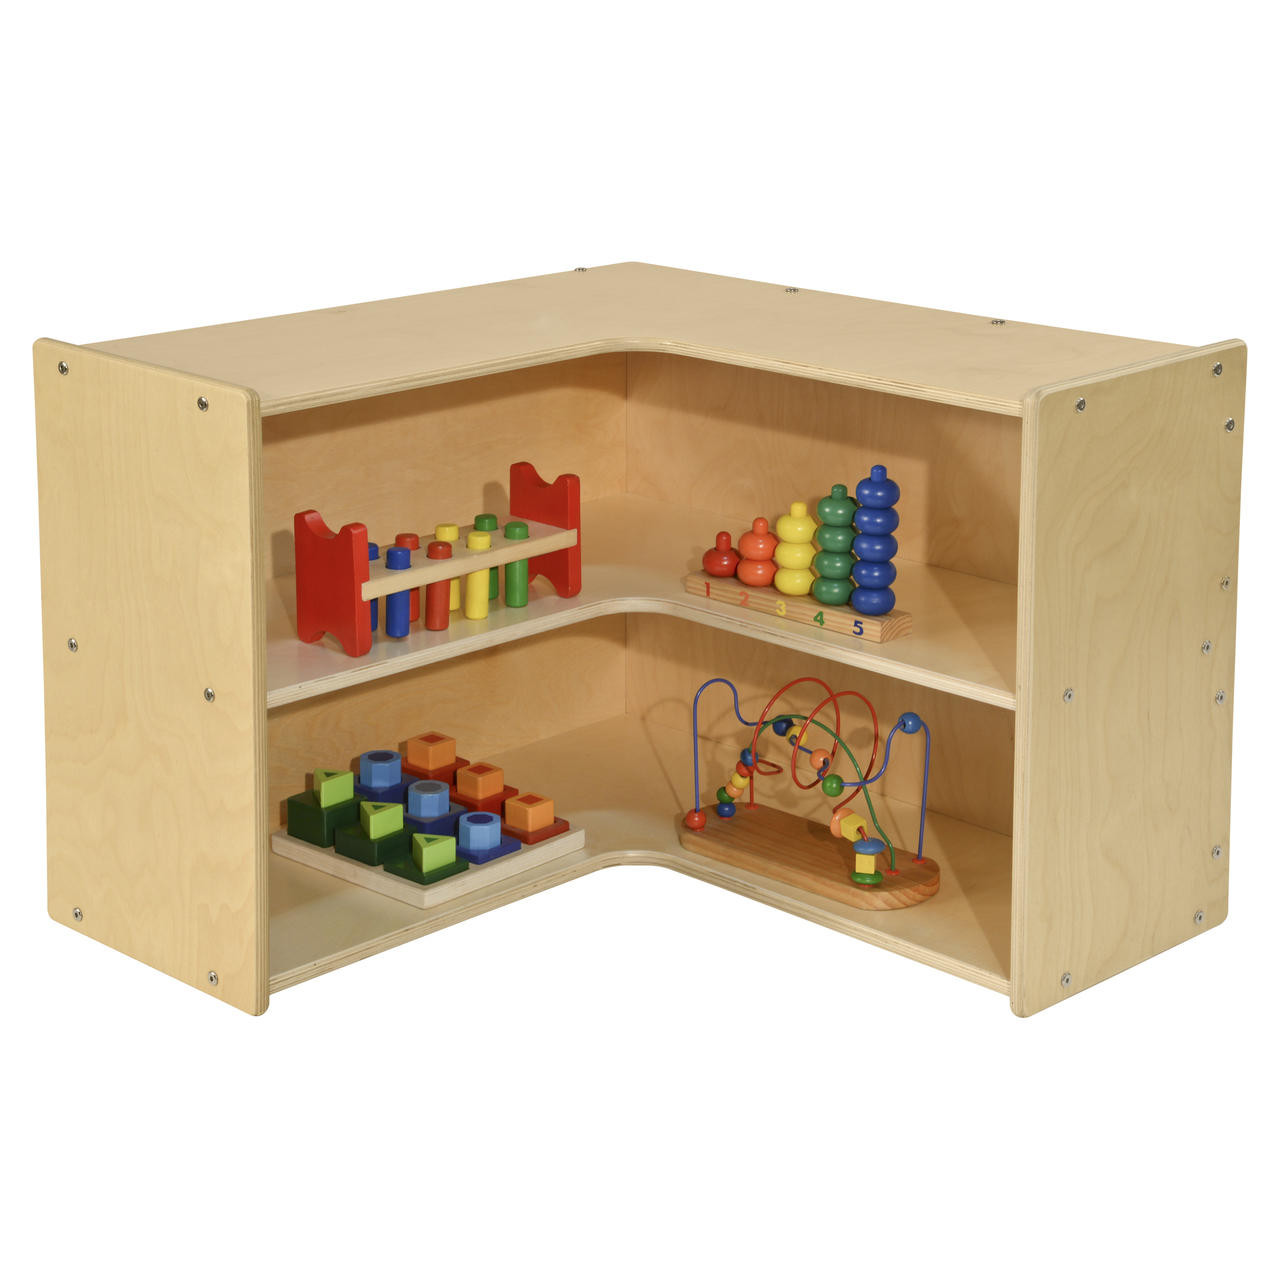  Contender C990652F Mobile Paper and Puzzle Storage